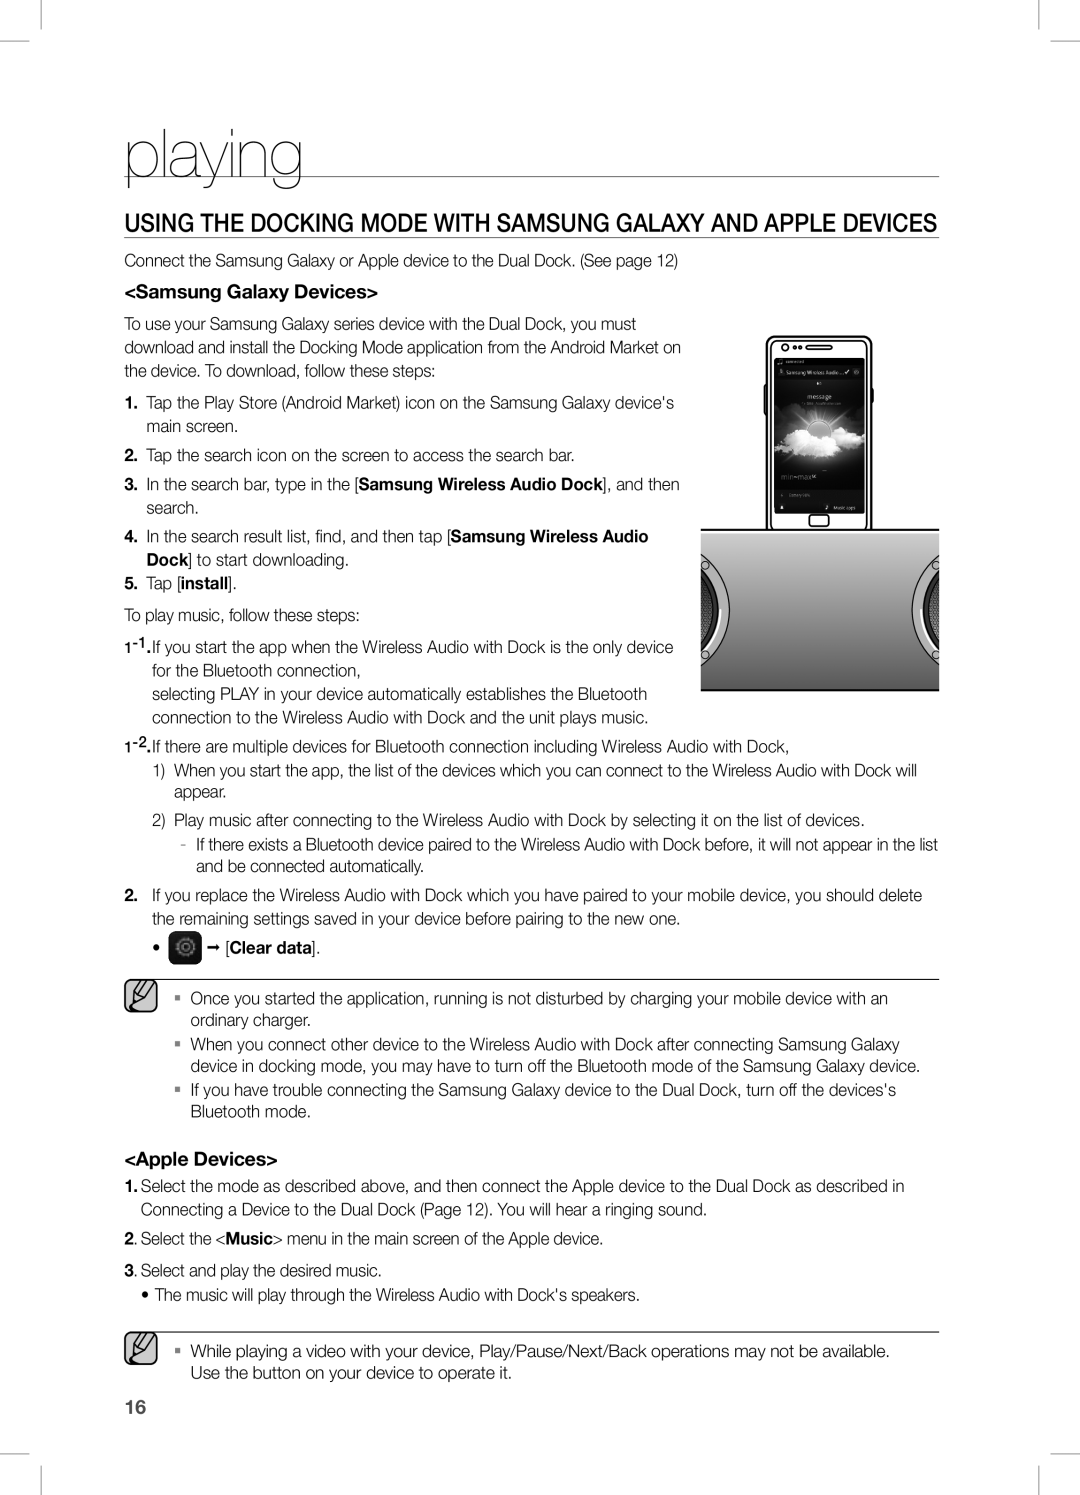 Samsung DA-E570 user manual playing, Samsung Galaxy Devices, Apple Devices 